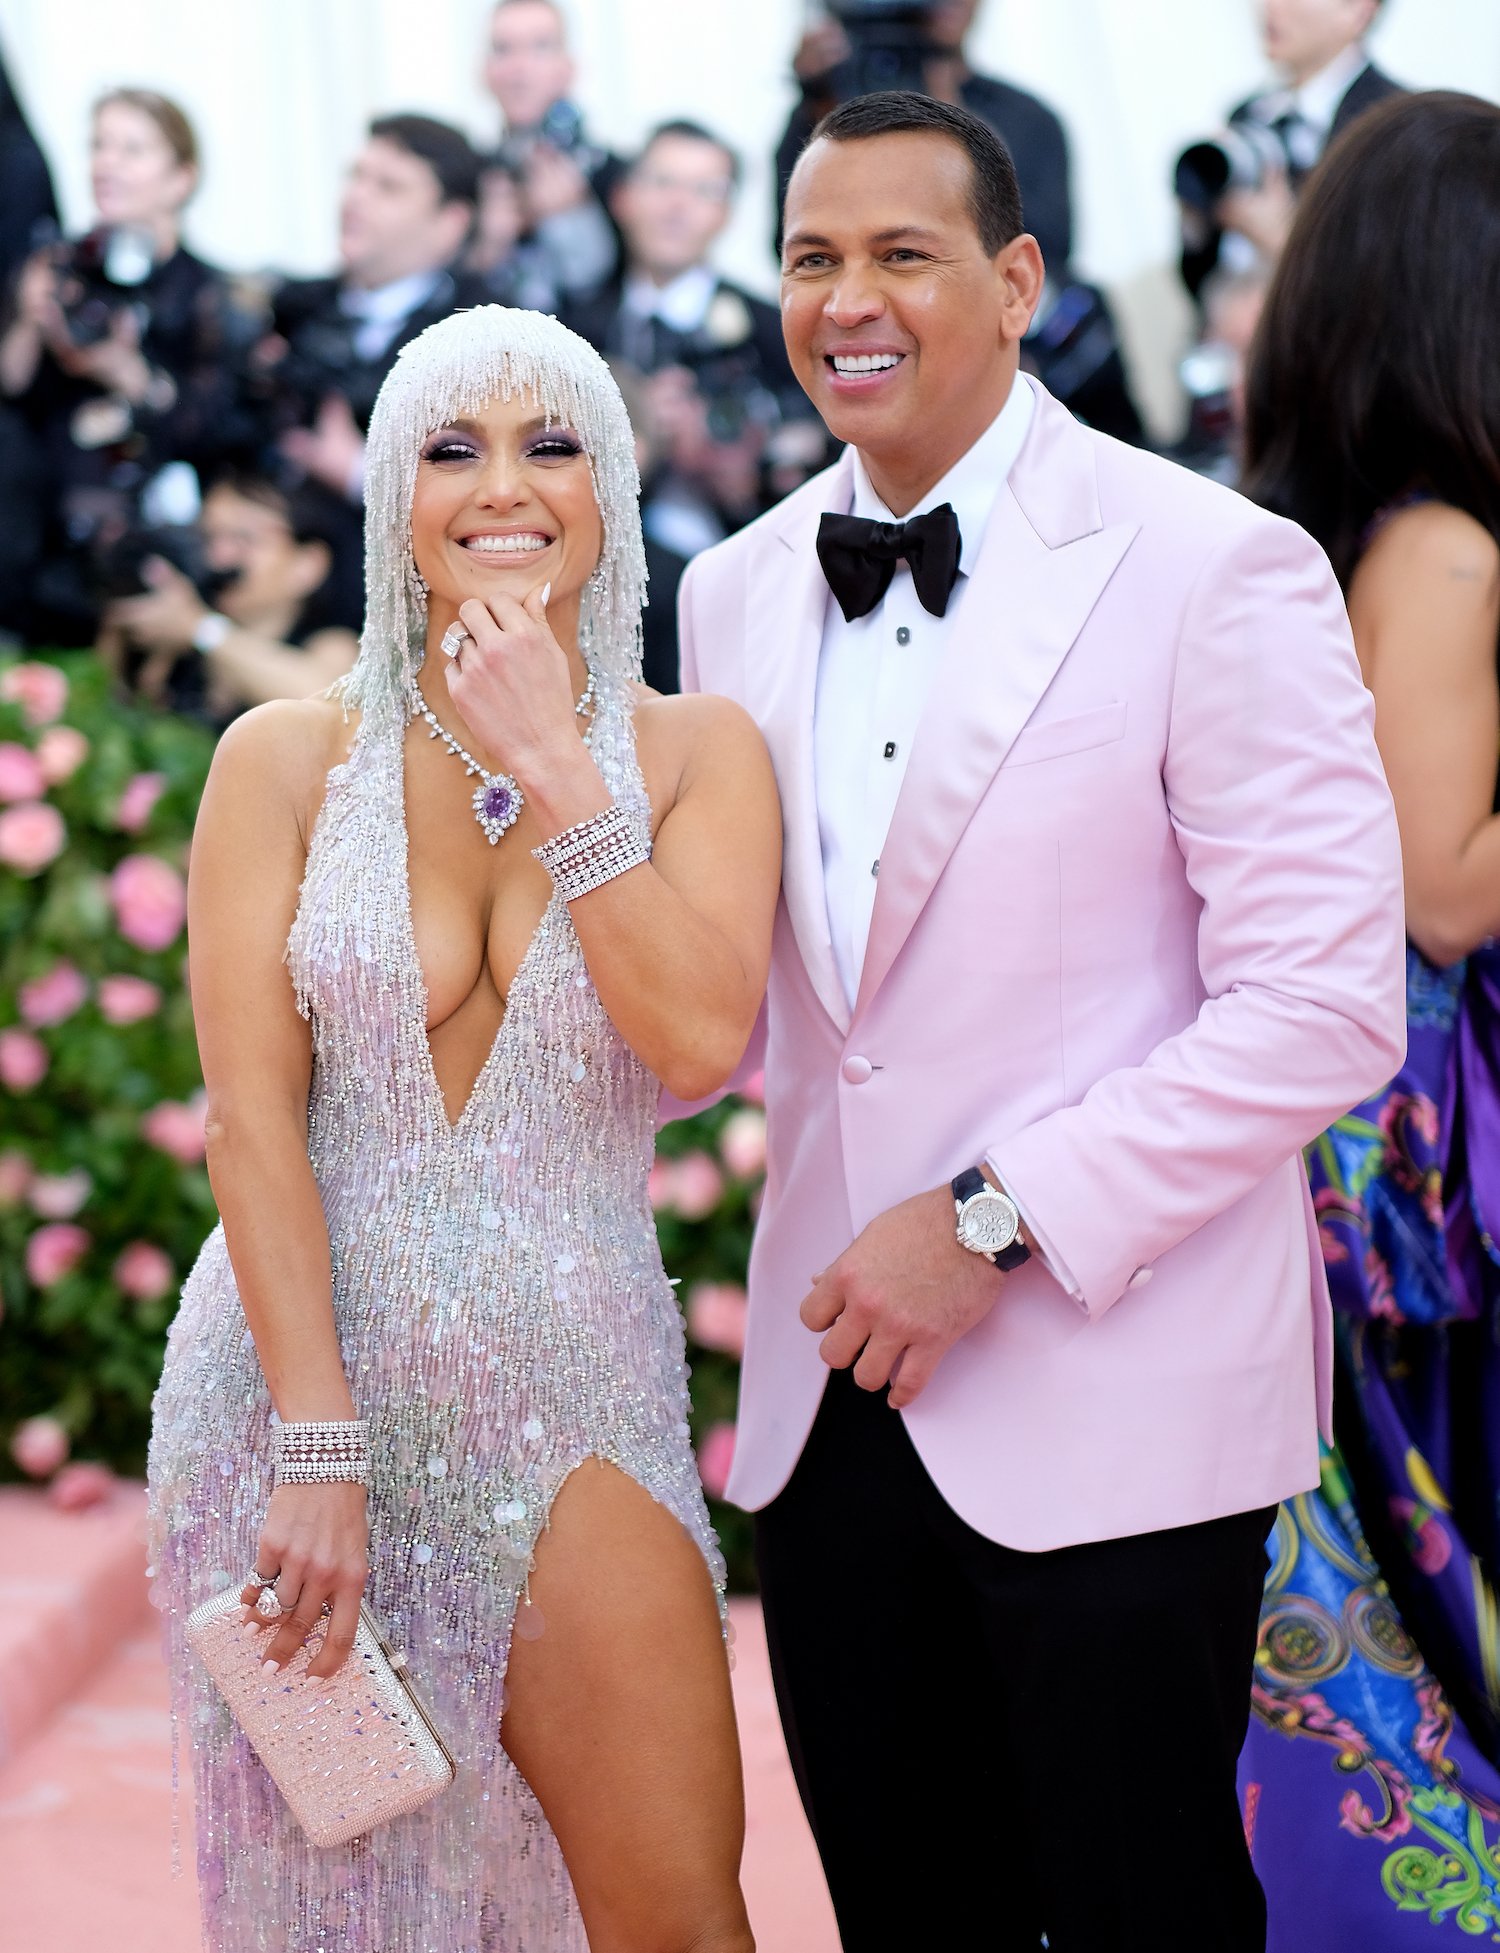 Jennifer Lopez and Alex Rodriguez on the red carpet at the Met Gala